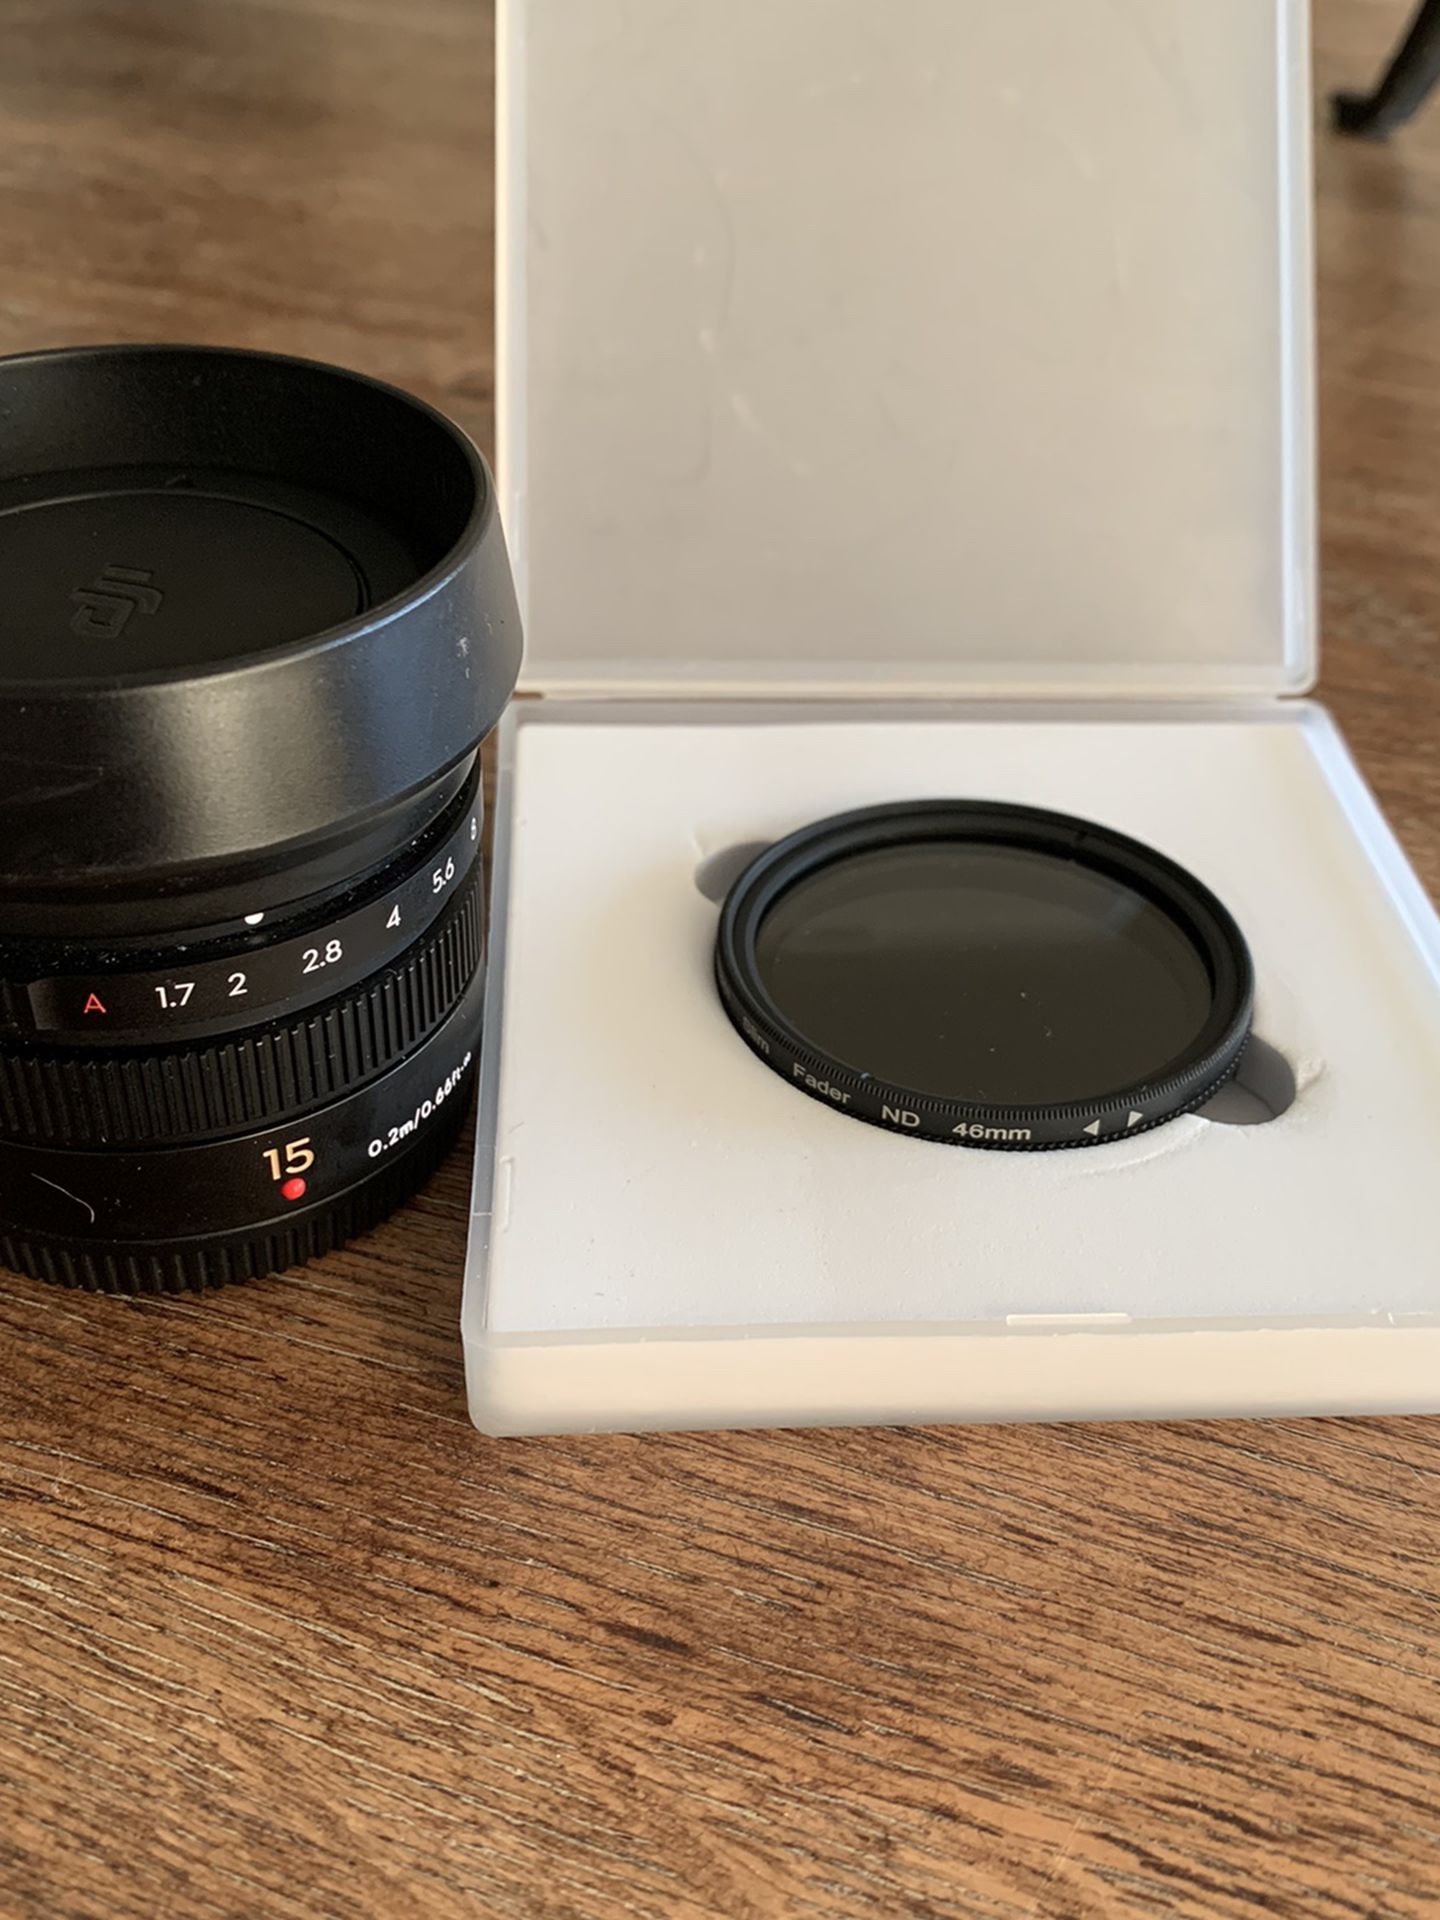 Zenmuse X5s 15mm Lens + Variable ND